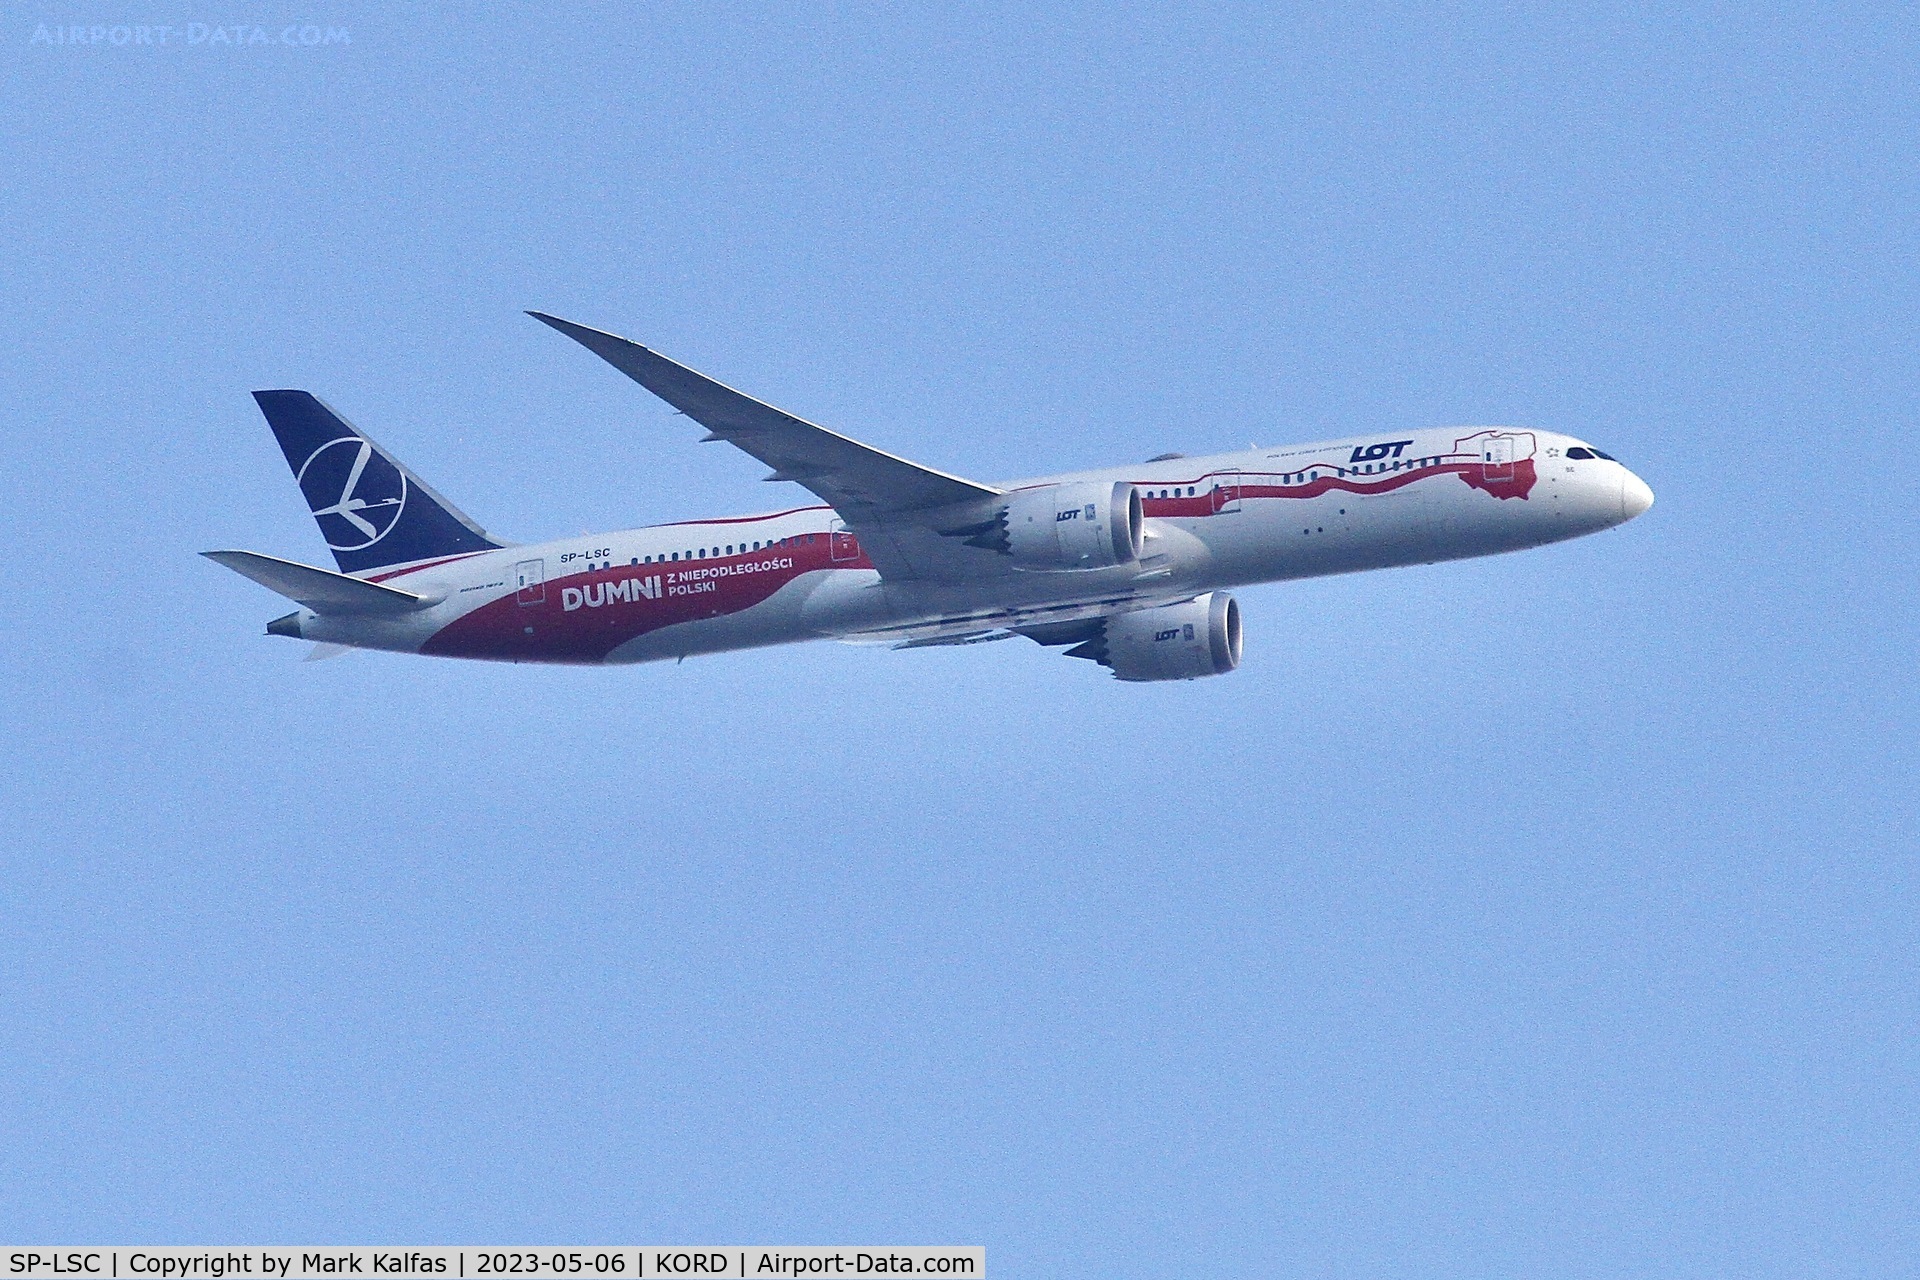 SP-LSC, 2018 Boeing 787-9 Dreamliner Dreamliner C/N 39293, LOT Boeing 787-9 Dreamliner, SP-LSC, operating at LOT3 from Warsaw to Chicago, on approach to ORD.